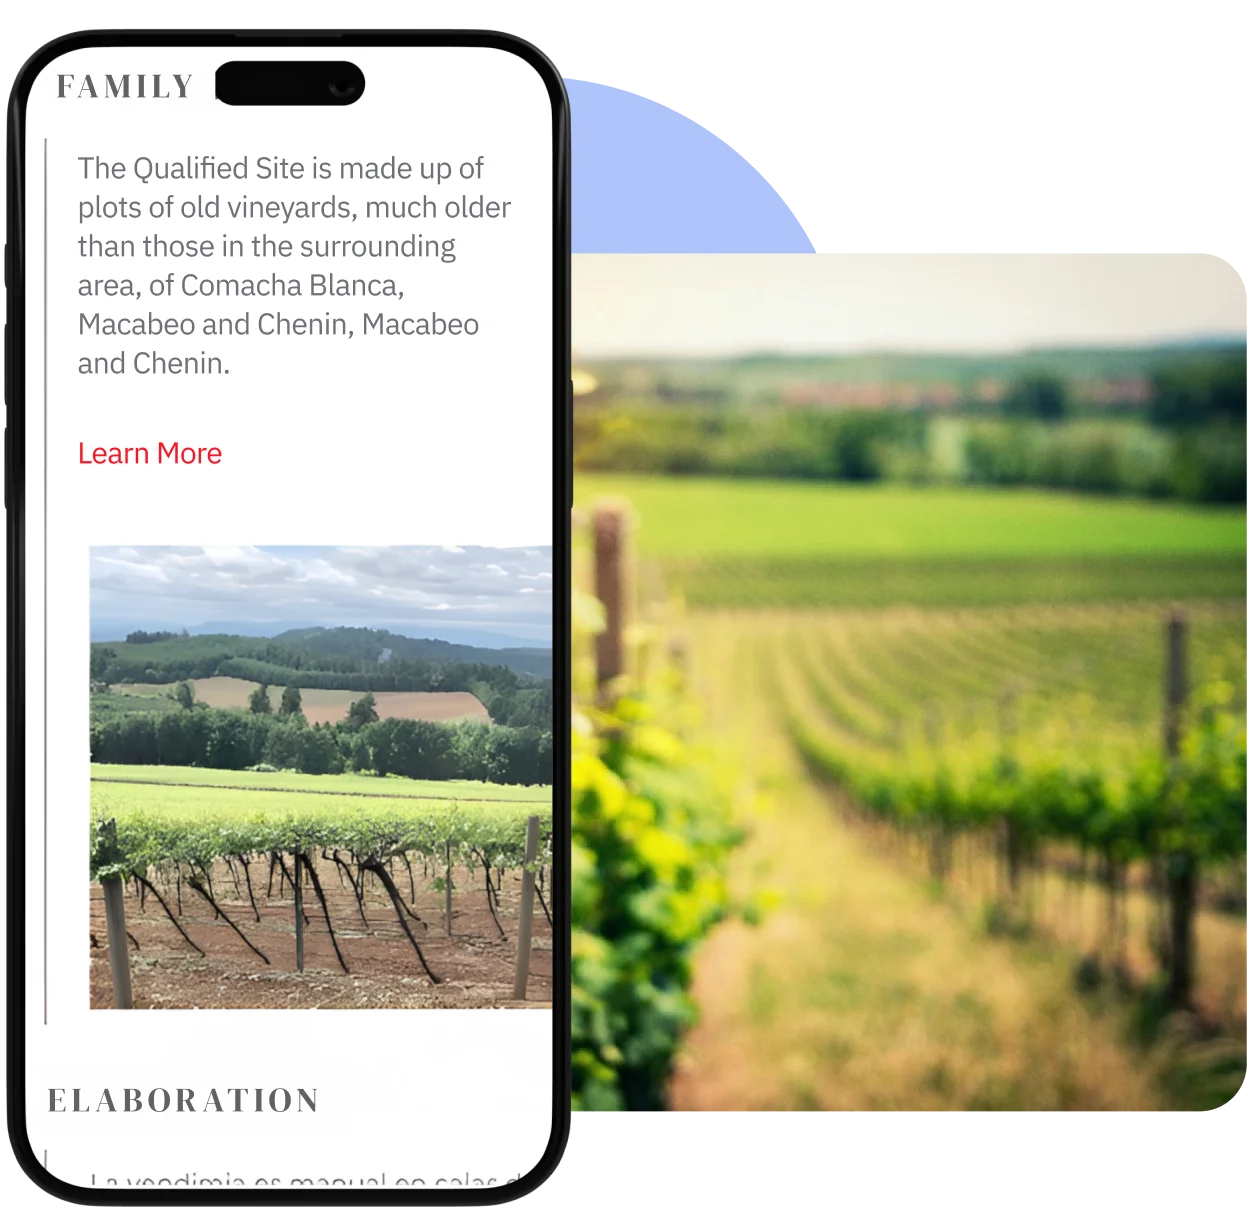 Tell your wine story digitally